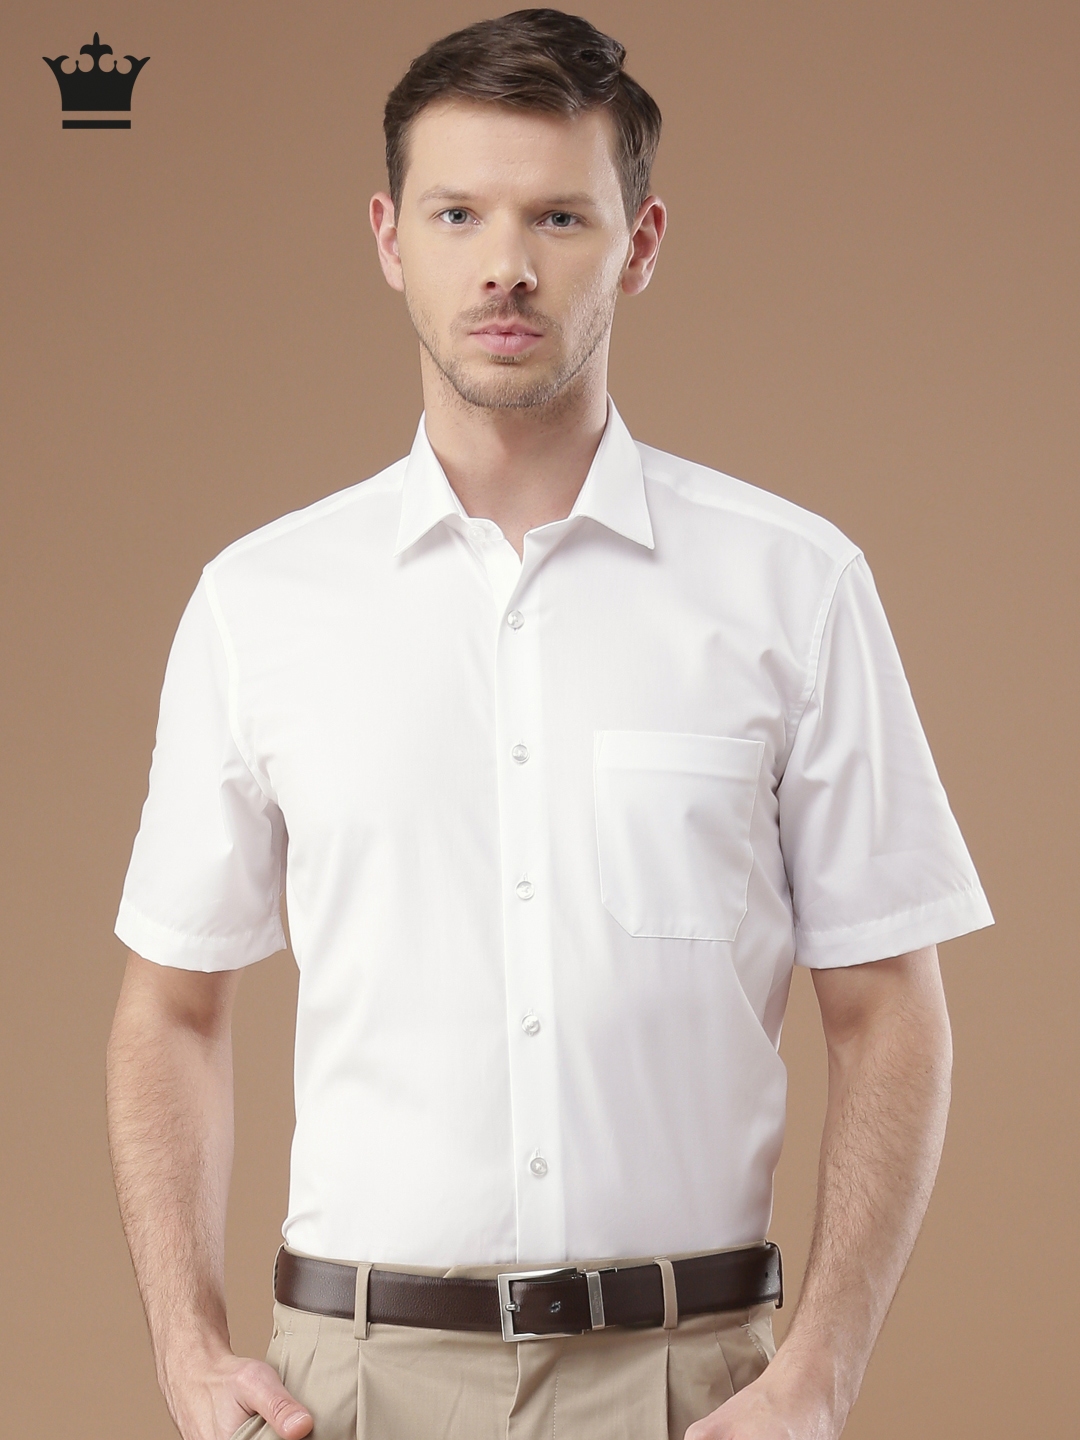 LOUIS PHILIPPE Men Solid Formal White Shirt